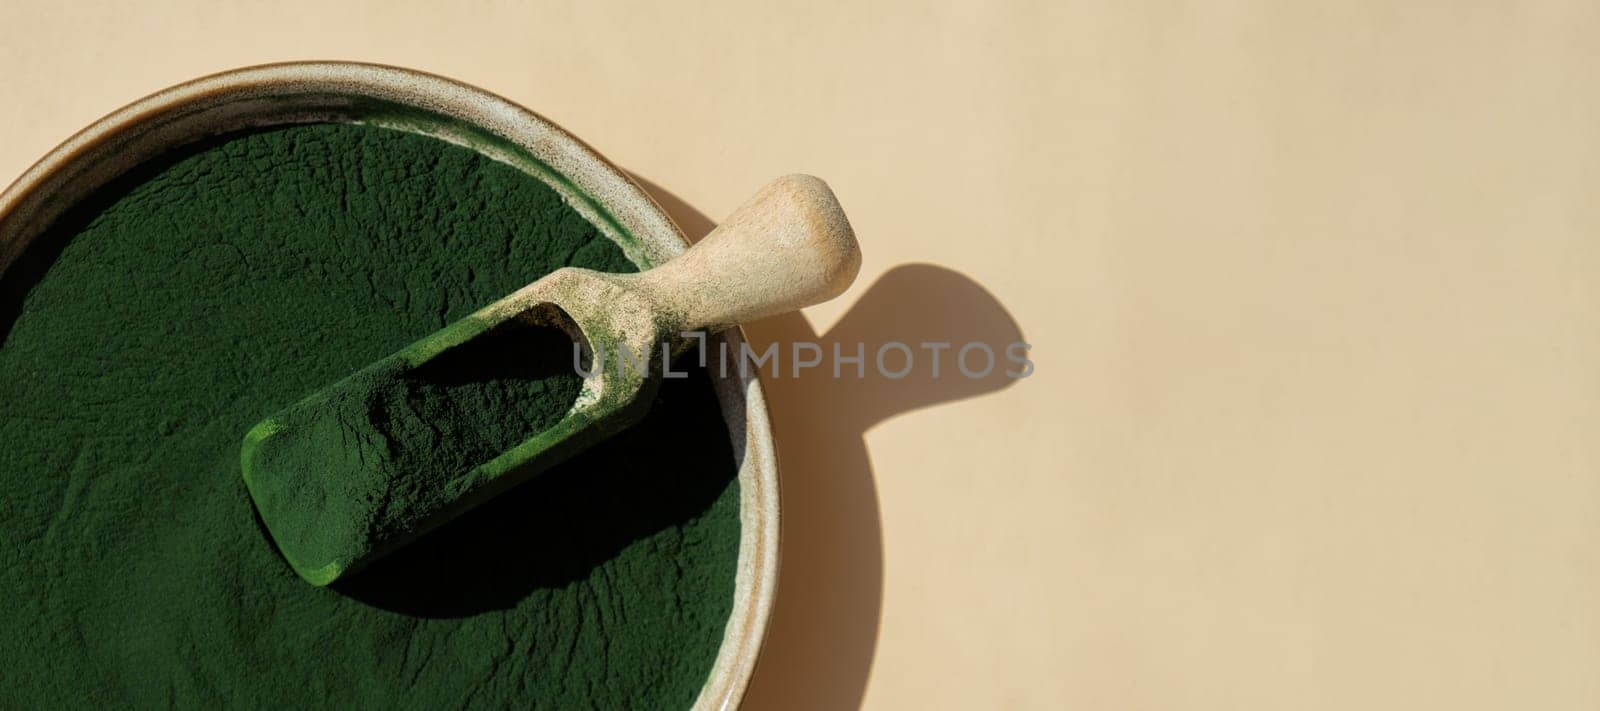 Natural organic green spirulina algae powder in bowl and wooden spoon on neutral background. Chlorella seaweed vegan superfood supplement source and detox. Copy space Healthy nutritional antioxidant by anna_stasiia